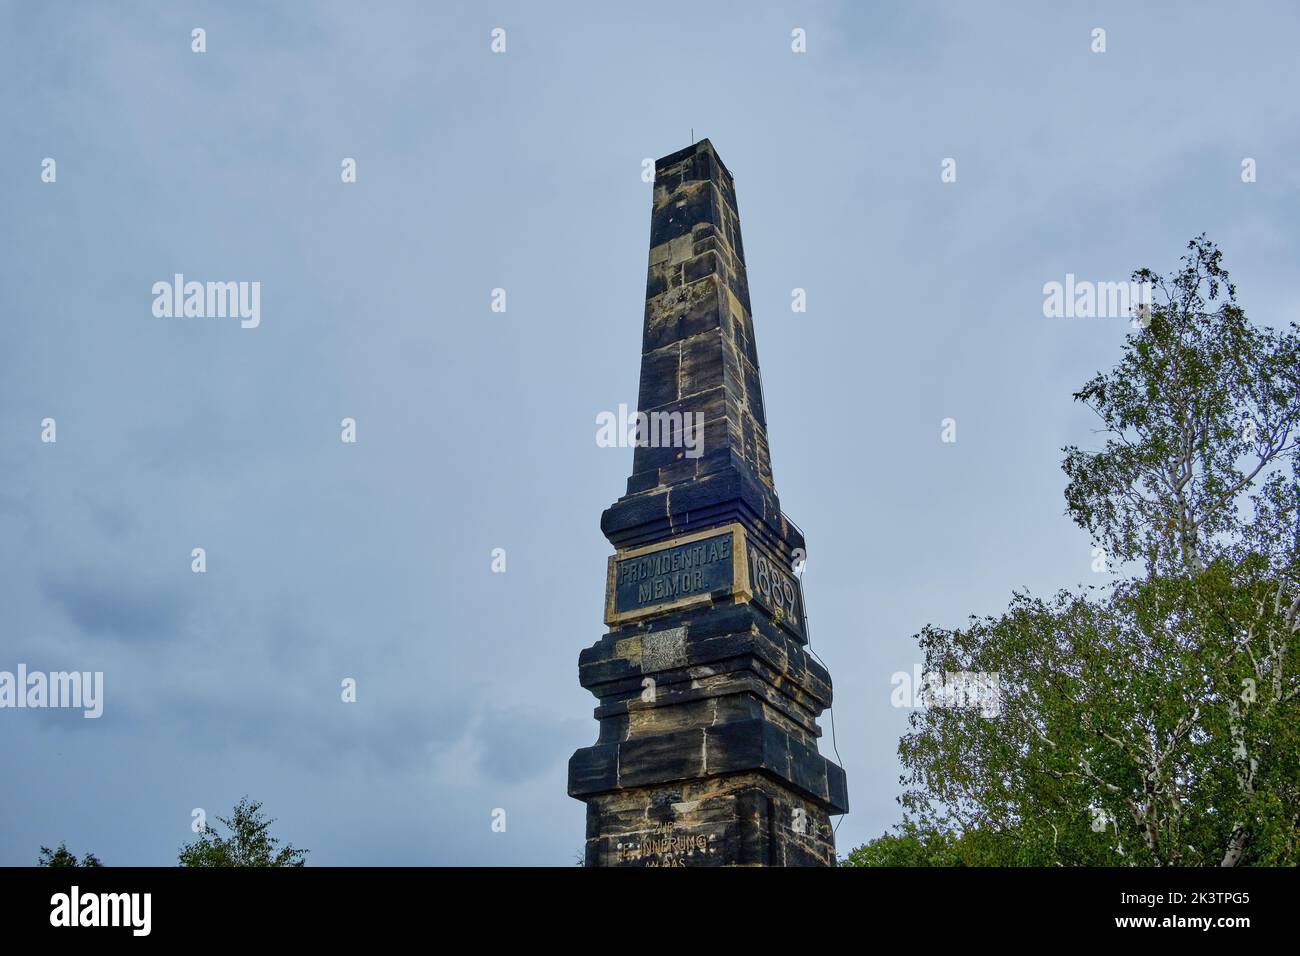 So-called Wettin Obelisk on Lilienstein mountain to celebrate the 800th anniversary of the House of Wettin in 1889, Saxon Switzerland Germany. Stock Photo